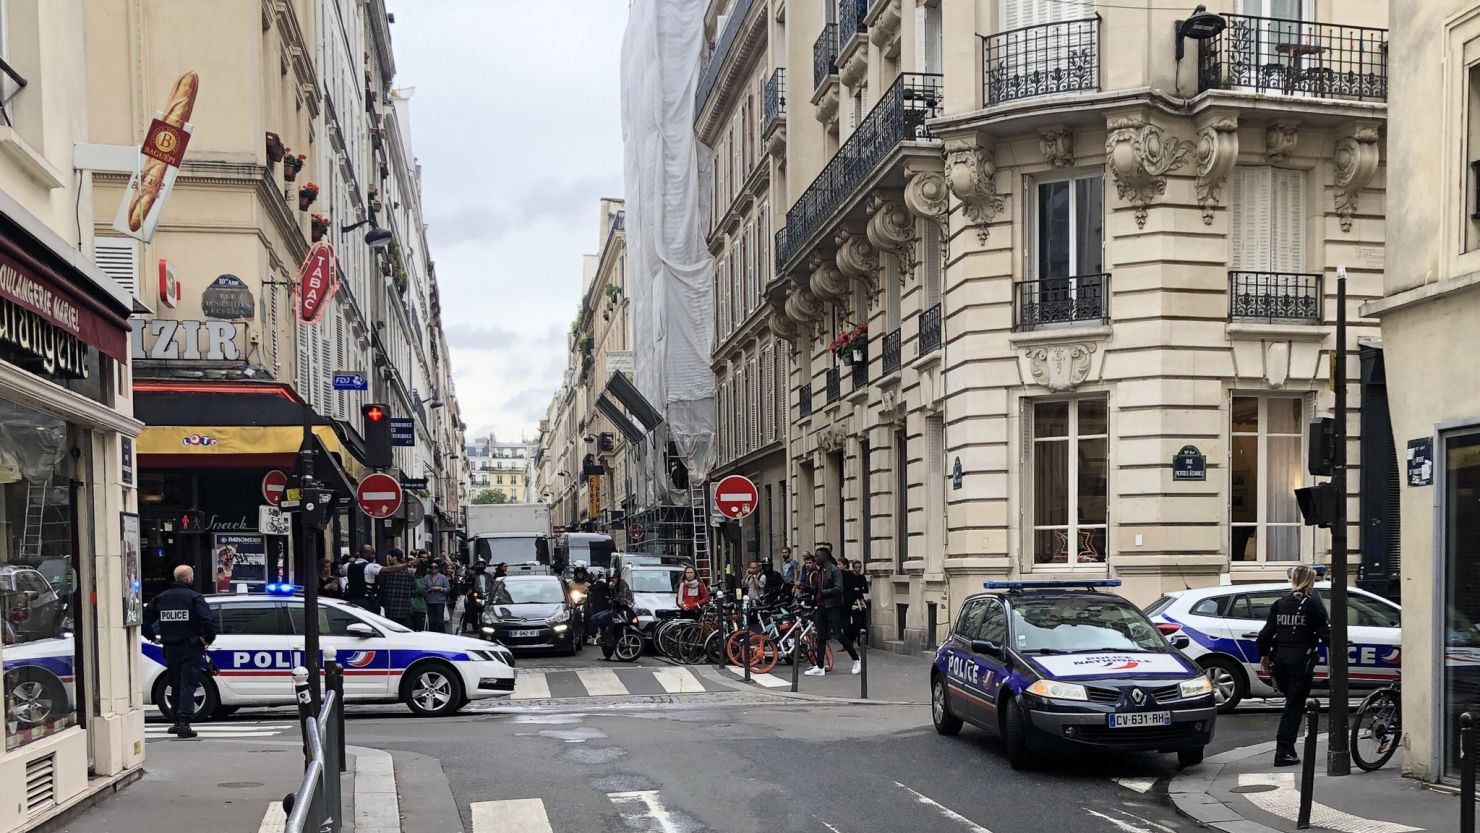 Bystanders in the Paris vicinity shared photos and video as the situation unfolded on Tuesday. 